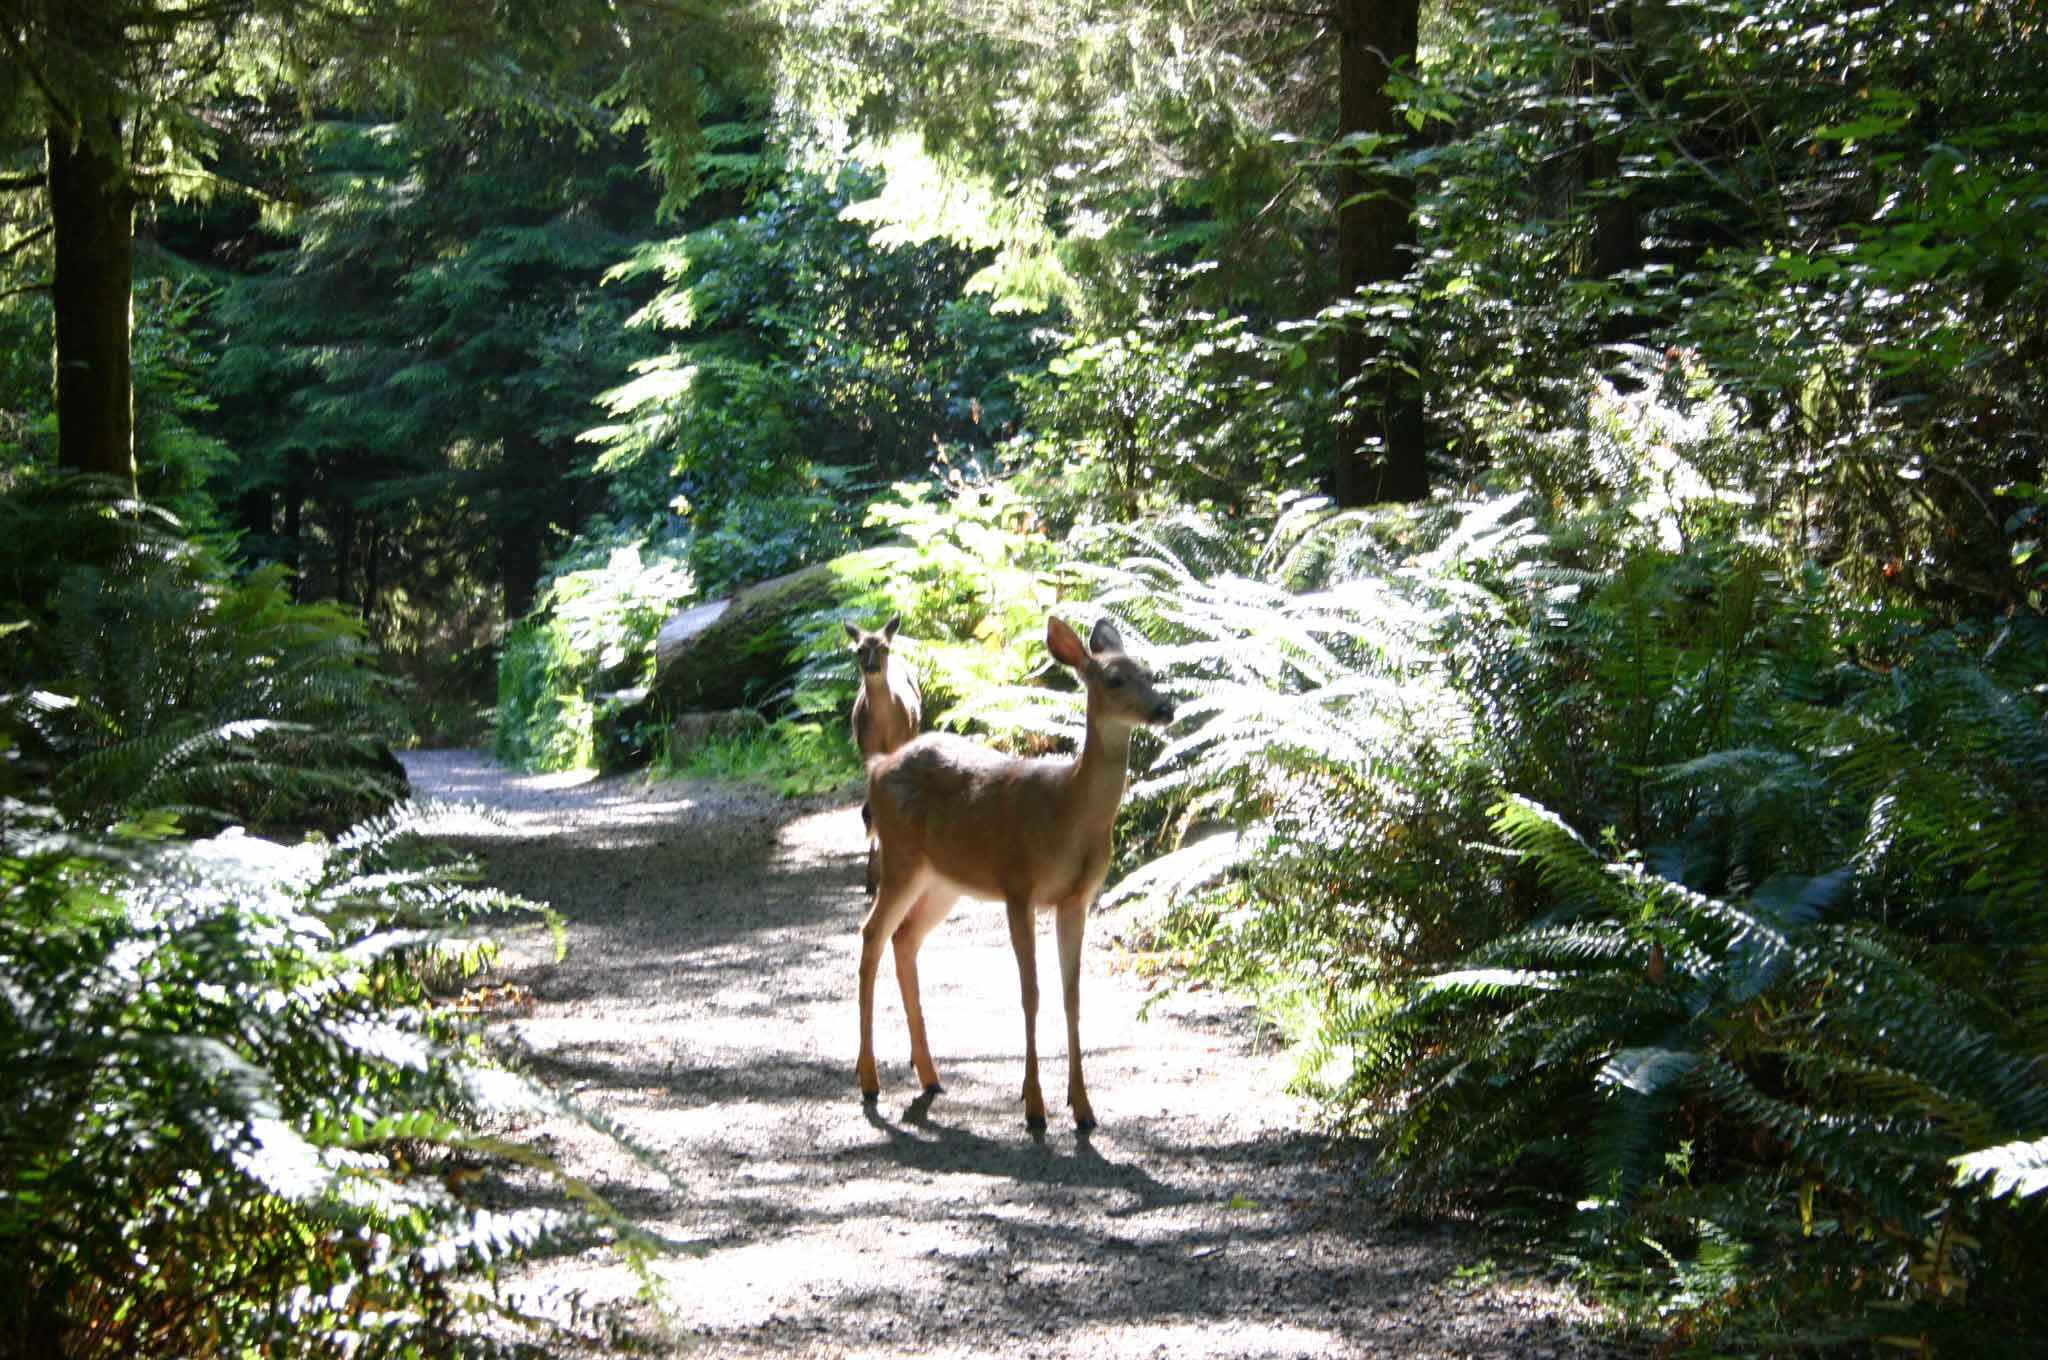 You never know who you may meet at Pt. Defiance Photo by Morf Morford